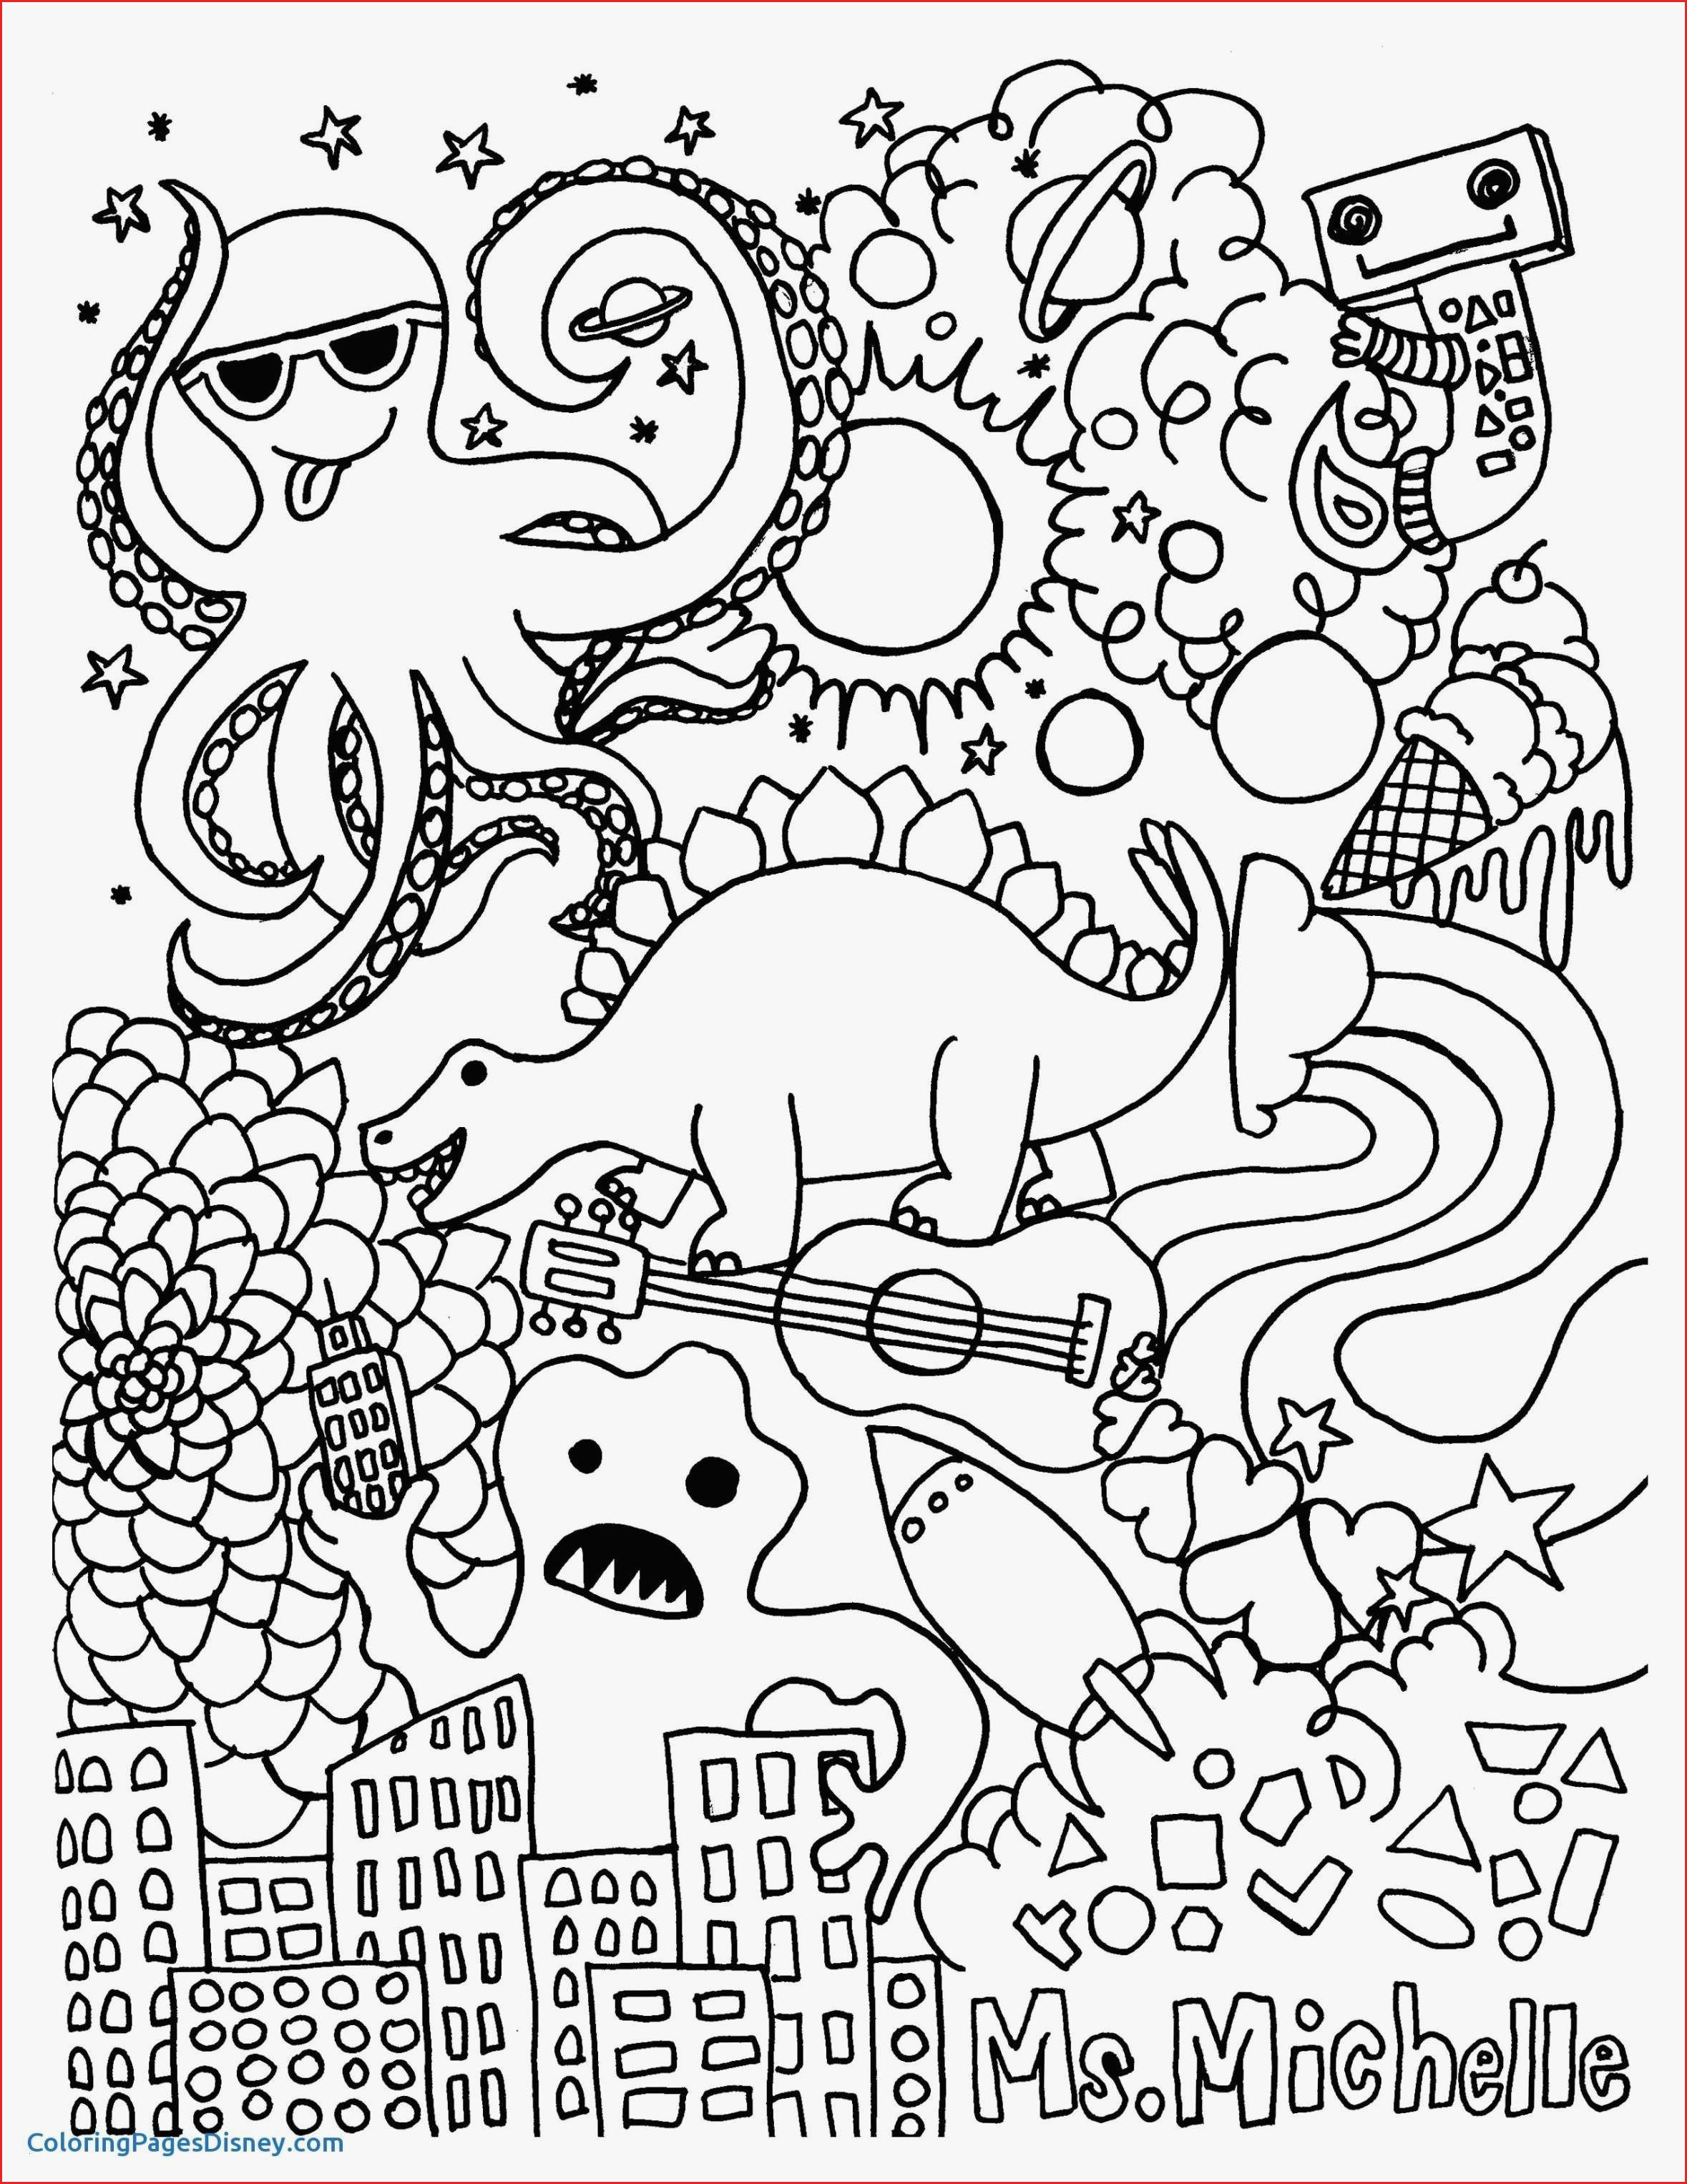 Disney.com Coloring Pages Coloring Pages Balloong Pages Free Disney Page Printable For Kids